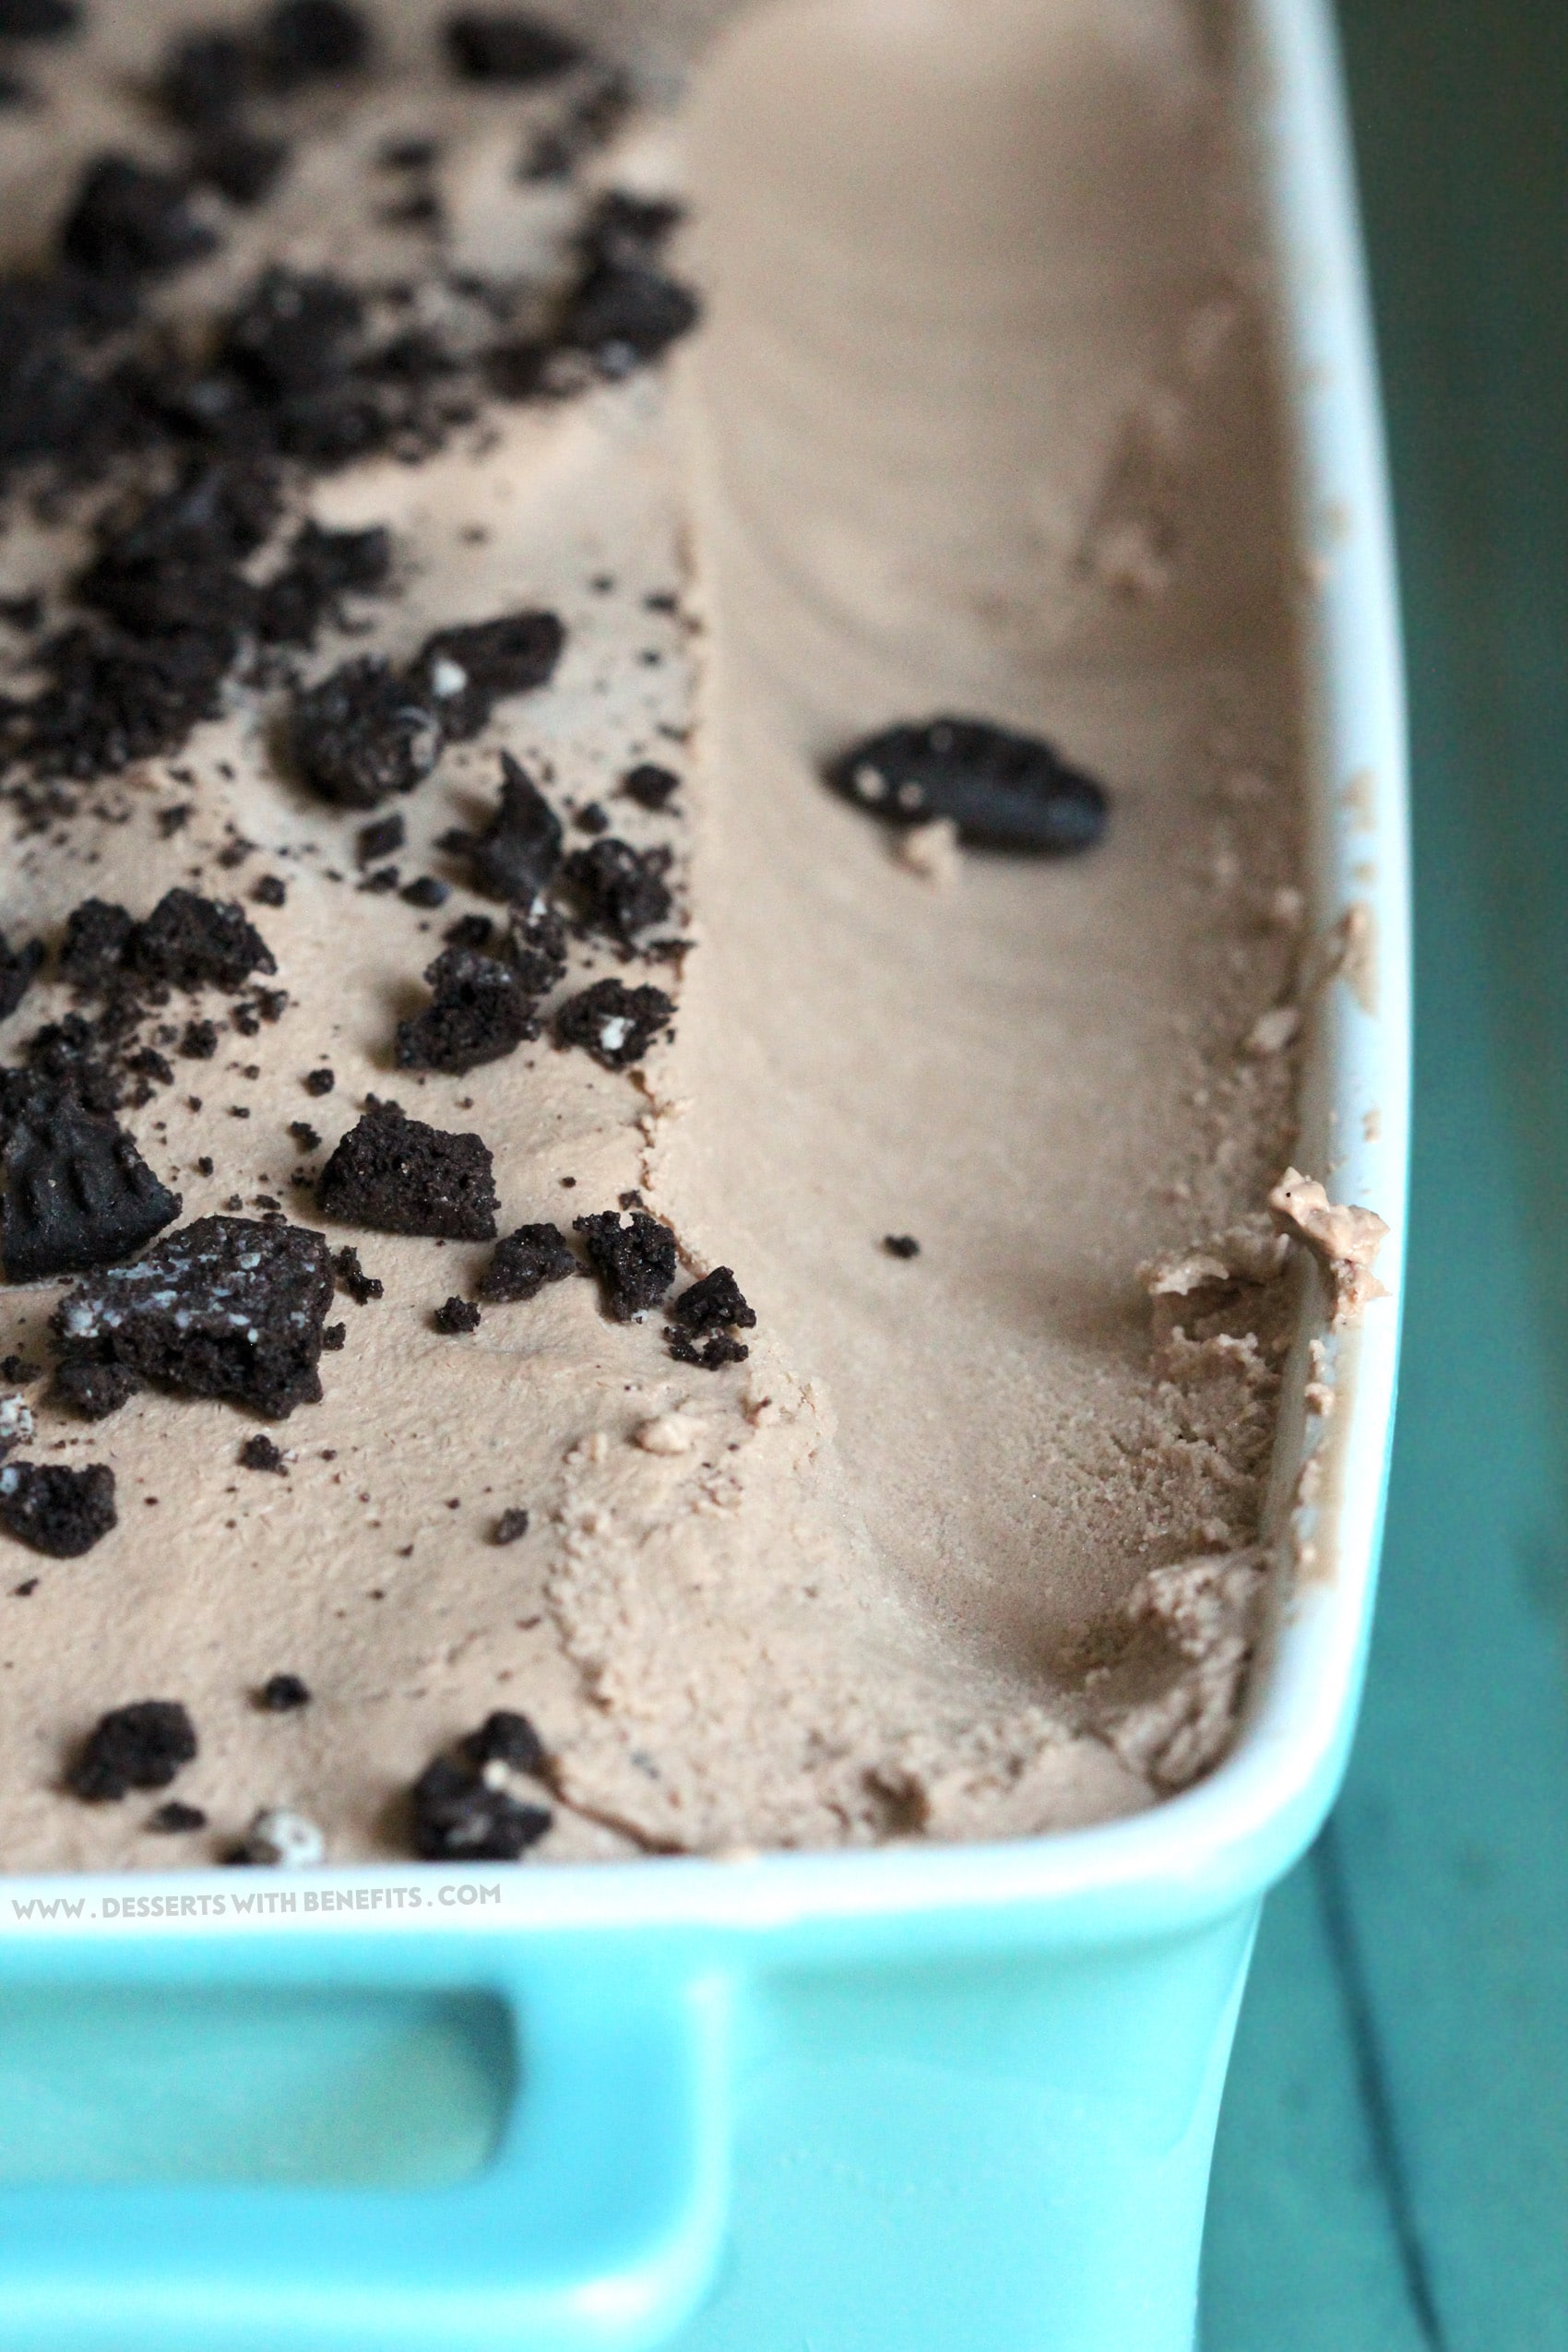 Healthy Cookies 'n' Cream Ice Cream recipe – sweet, creamy, addictive, and full of Oreo flavor, but made secretly sugar free, high protein, and gluten free! -- Healthy Dessert Recipes at Desserts with Benefits